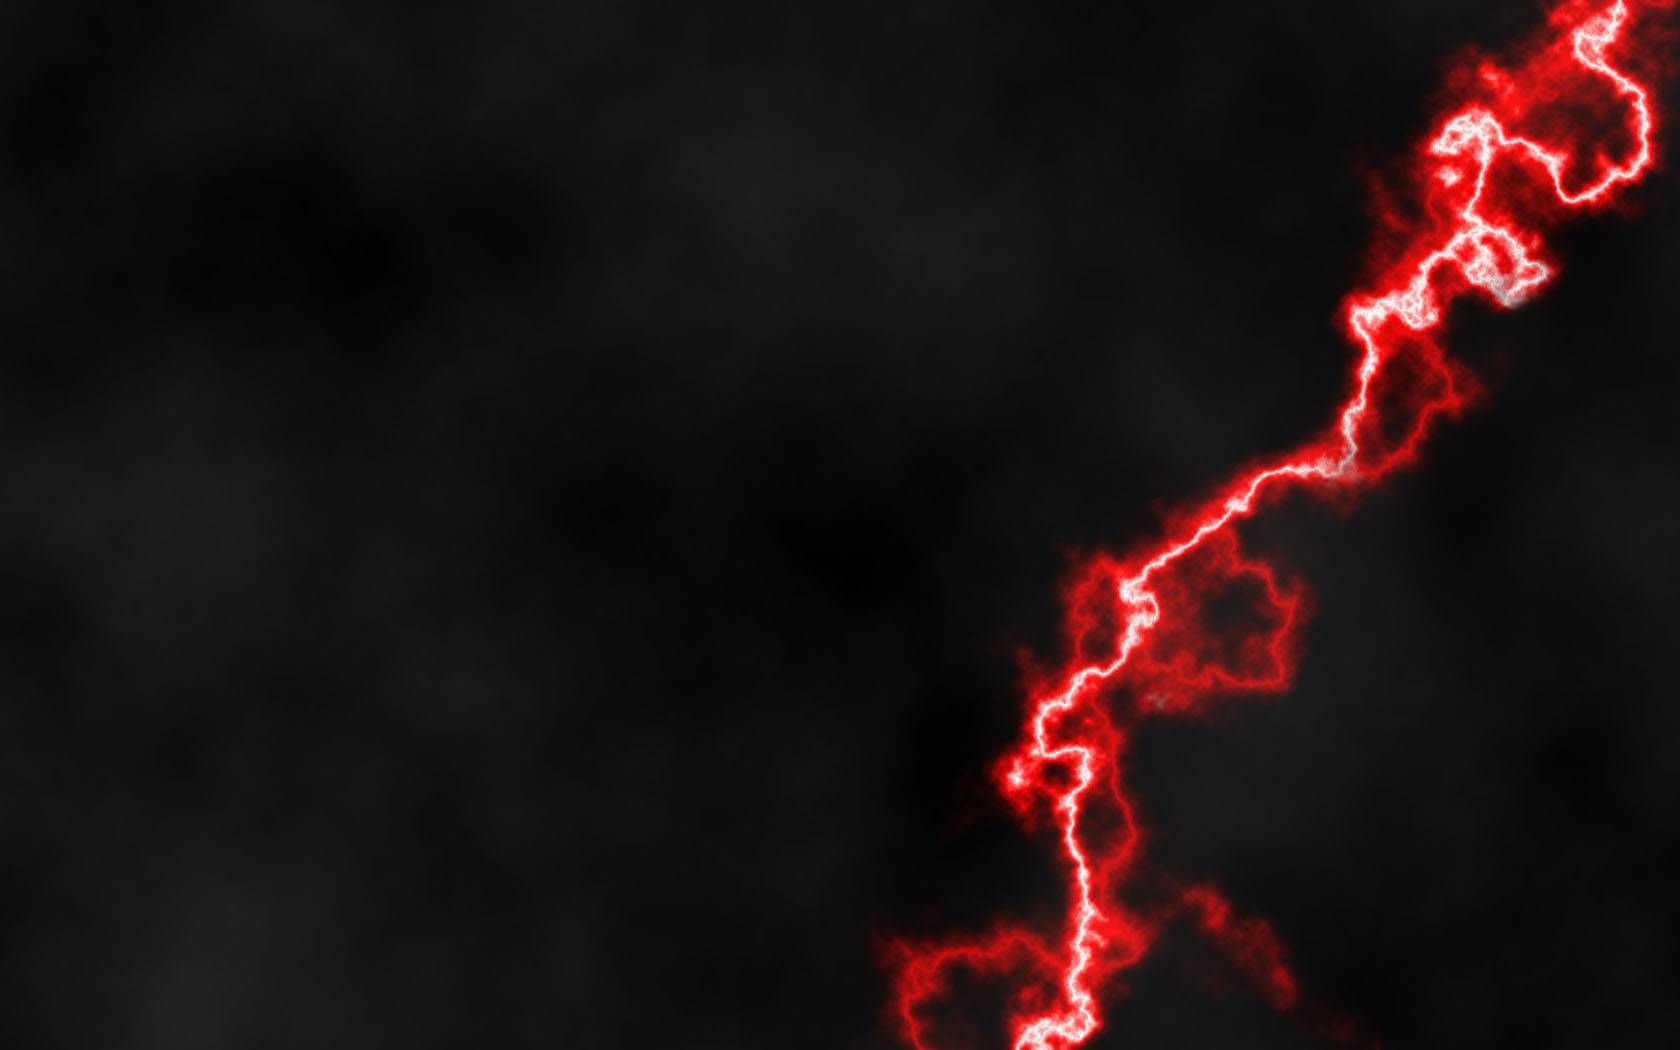 Red And Black Lightning Wallpapers Wallpaper Cave